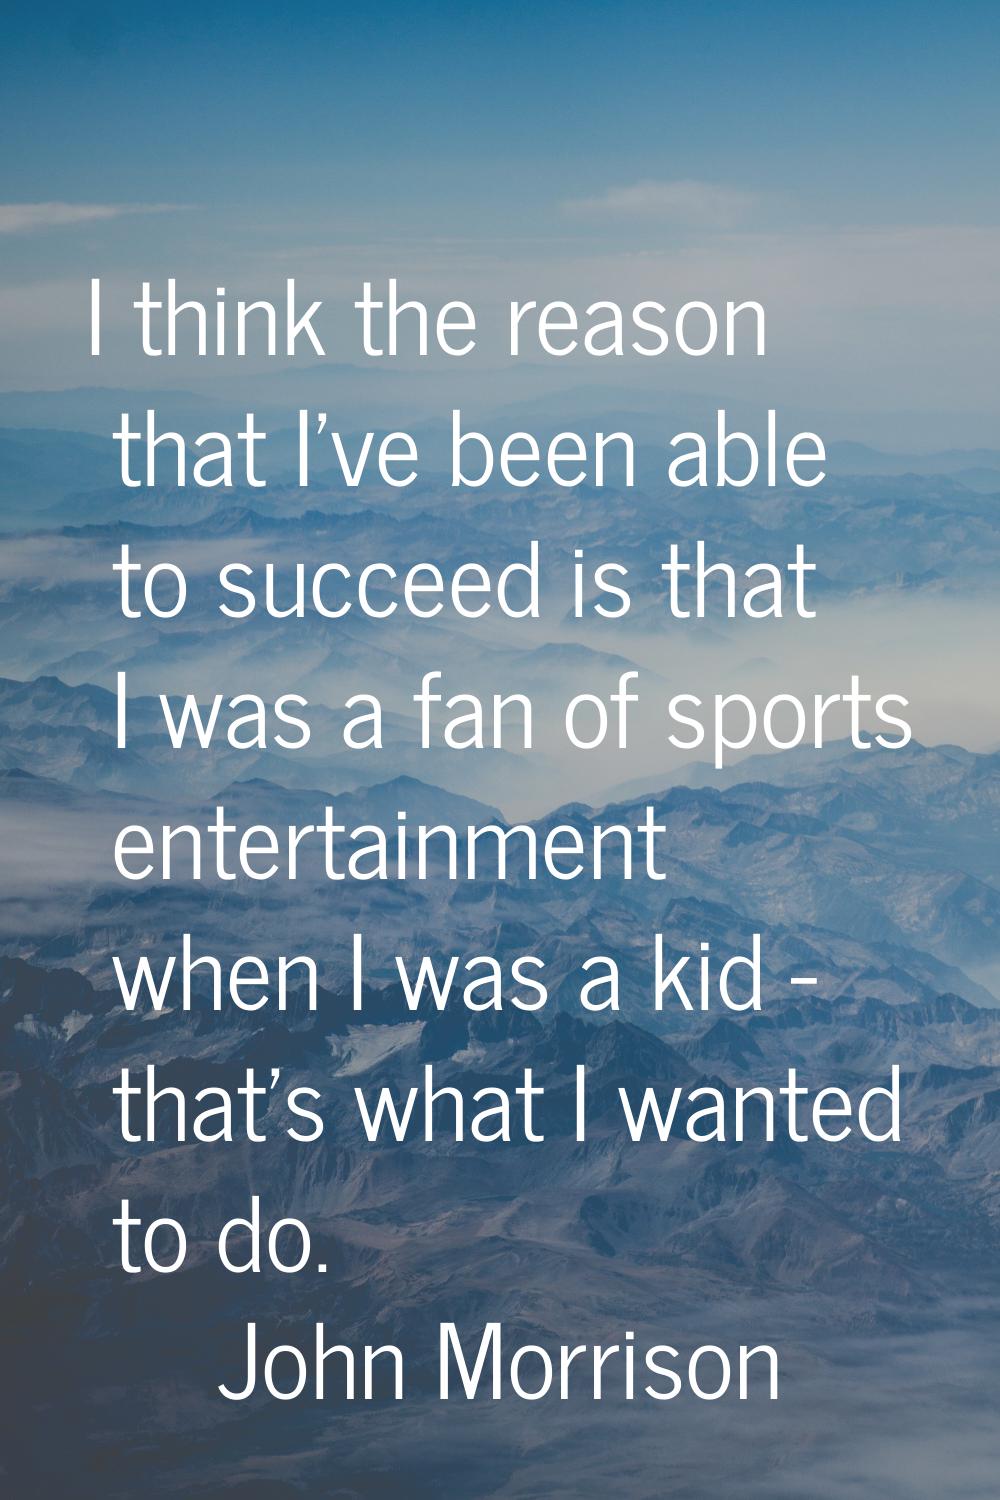 I think the reason that I've been able to succeed is that I was a fan of sports entertainment when 